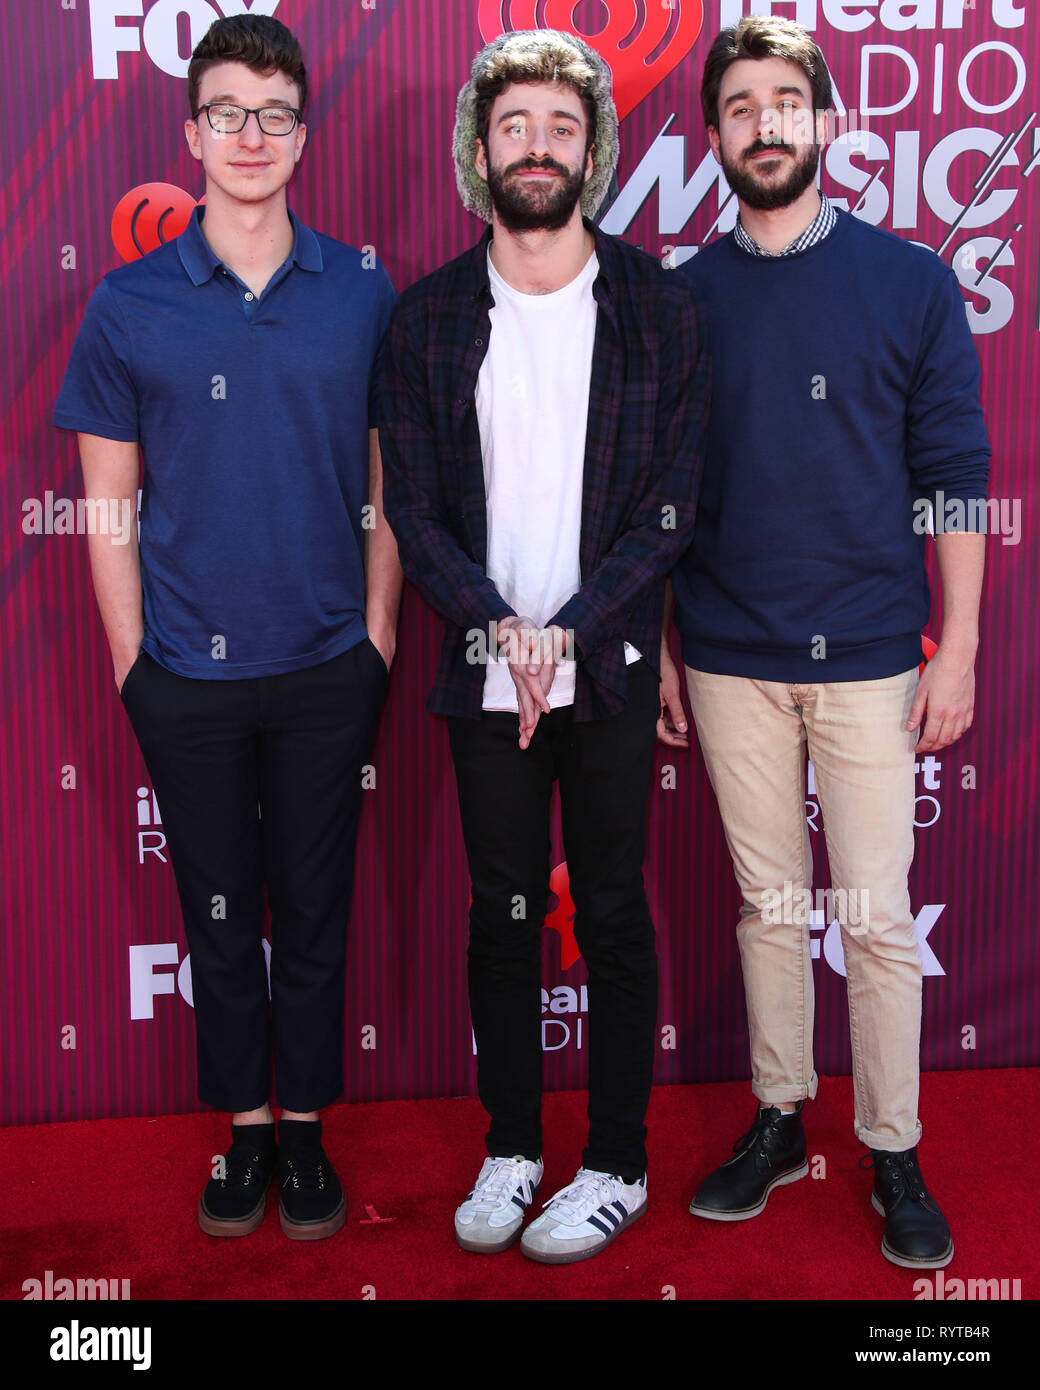 LOS ANGELES, CA, USA - MARCH 14: Ryan Joshua Met, Jack Evan Met and Adam Brett Met of AJR arrive at the 2019 iHeartRadio Music Awards held at Microsoft Theater at L.A. Live on March 14, 2019 in Los Angeles, California, United States. (Photo by Xavier Collin/Image Press Agency) Stock Photo